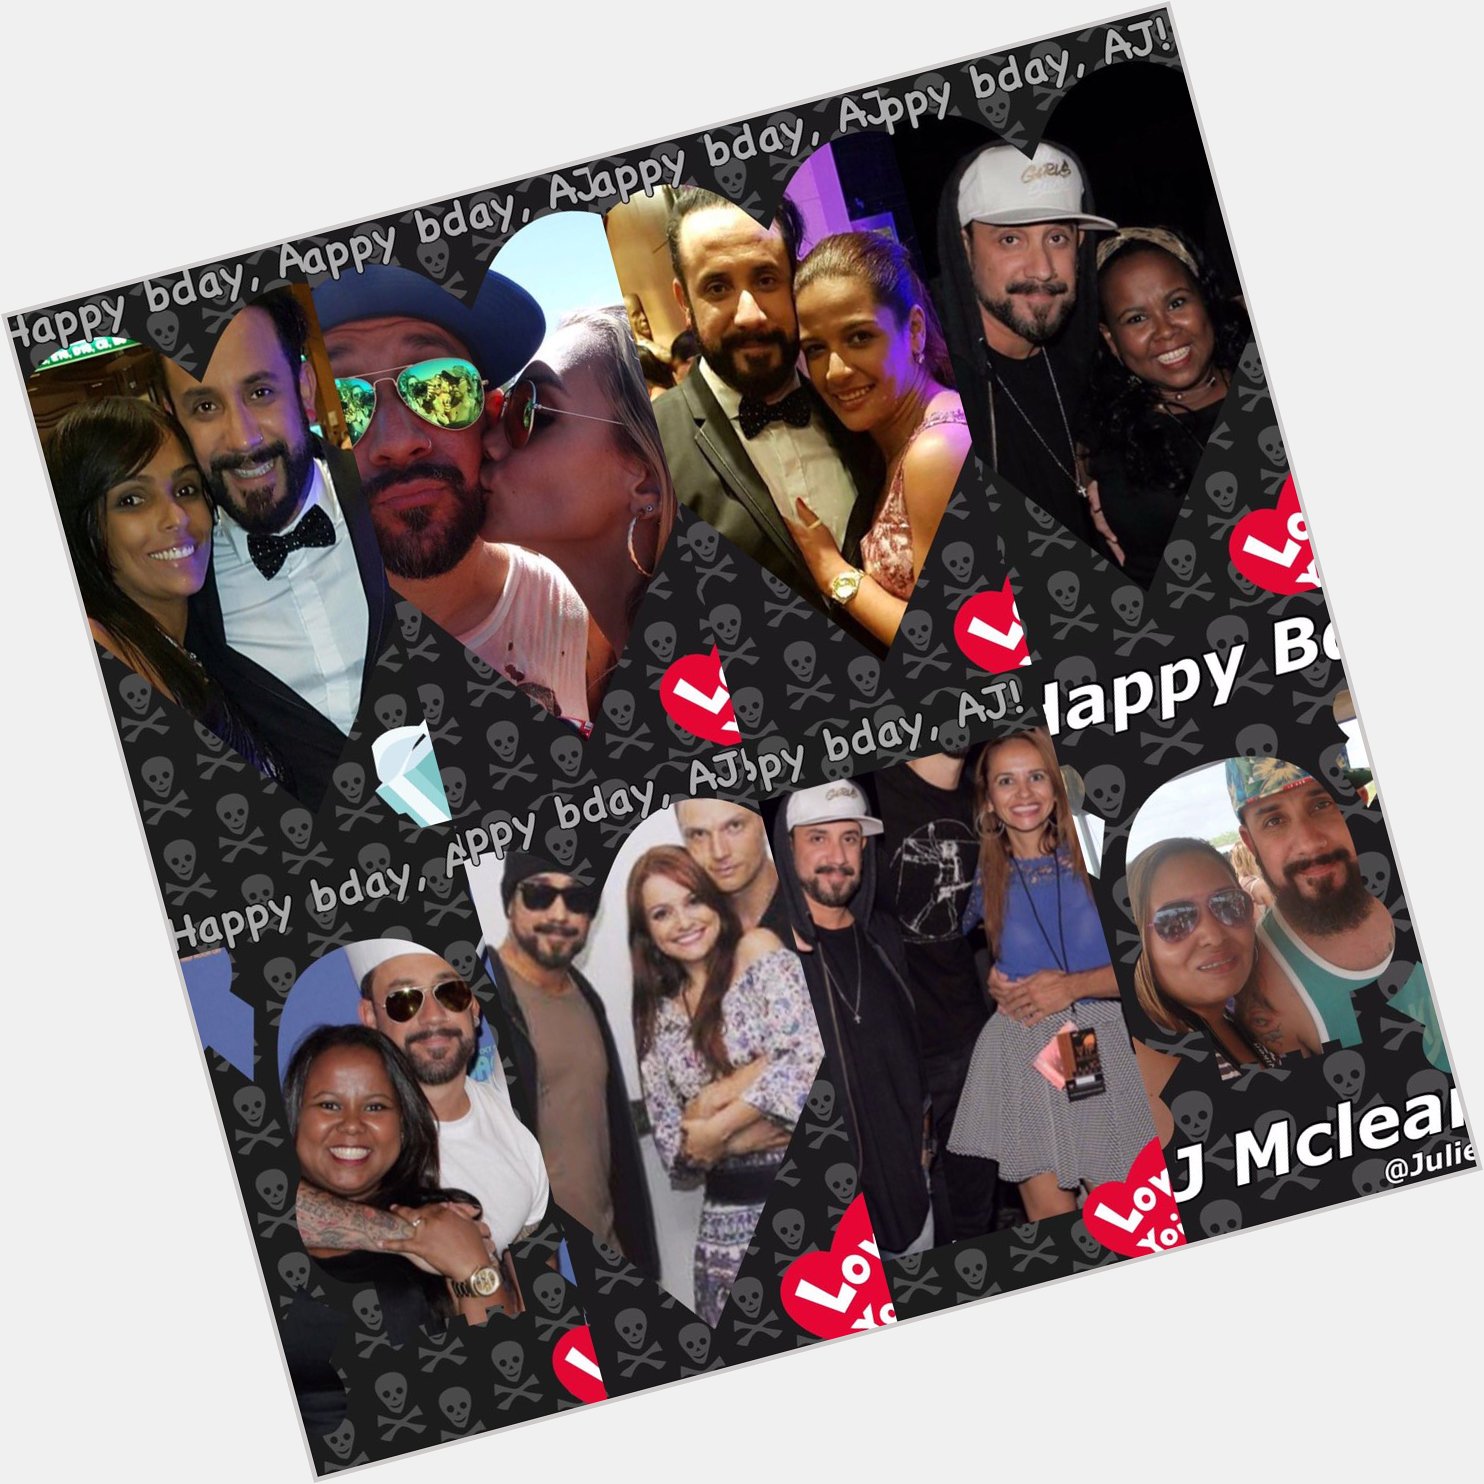   The best Fans with the best!
Happy birthday, AJ Mclean! 